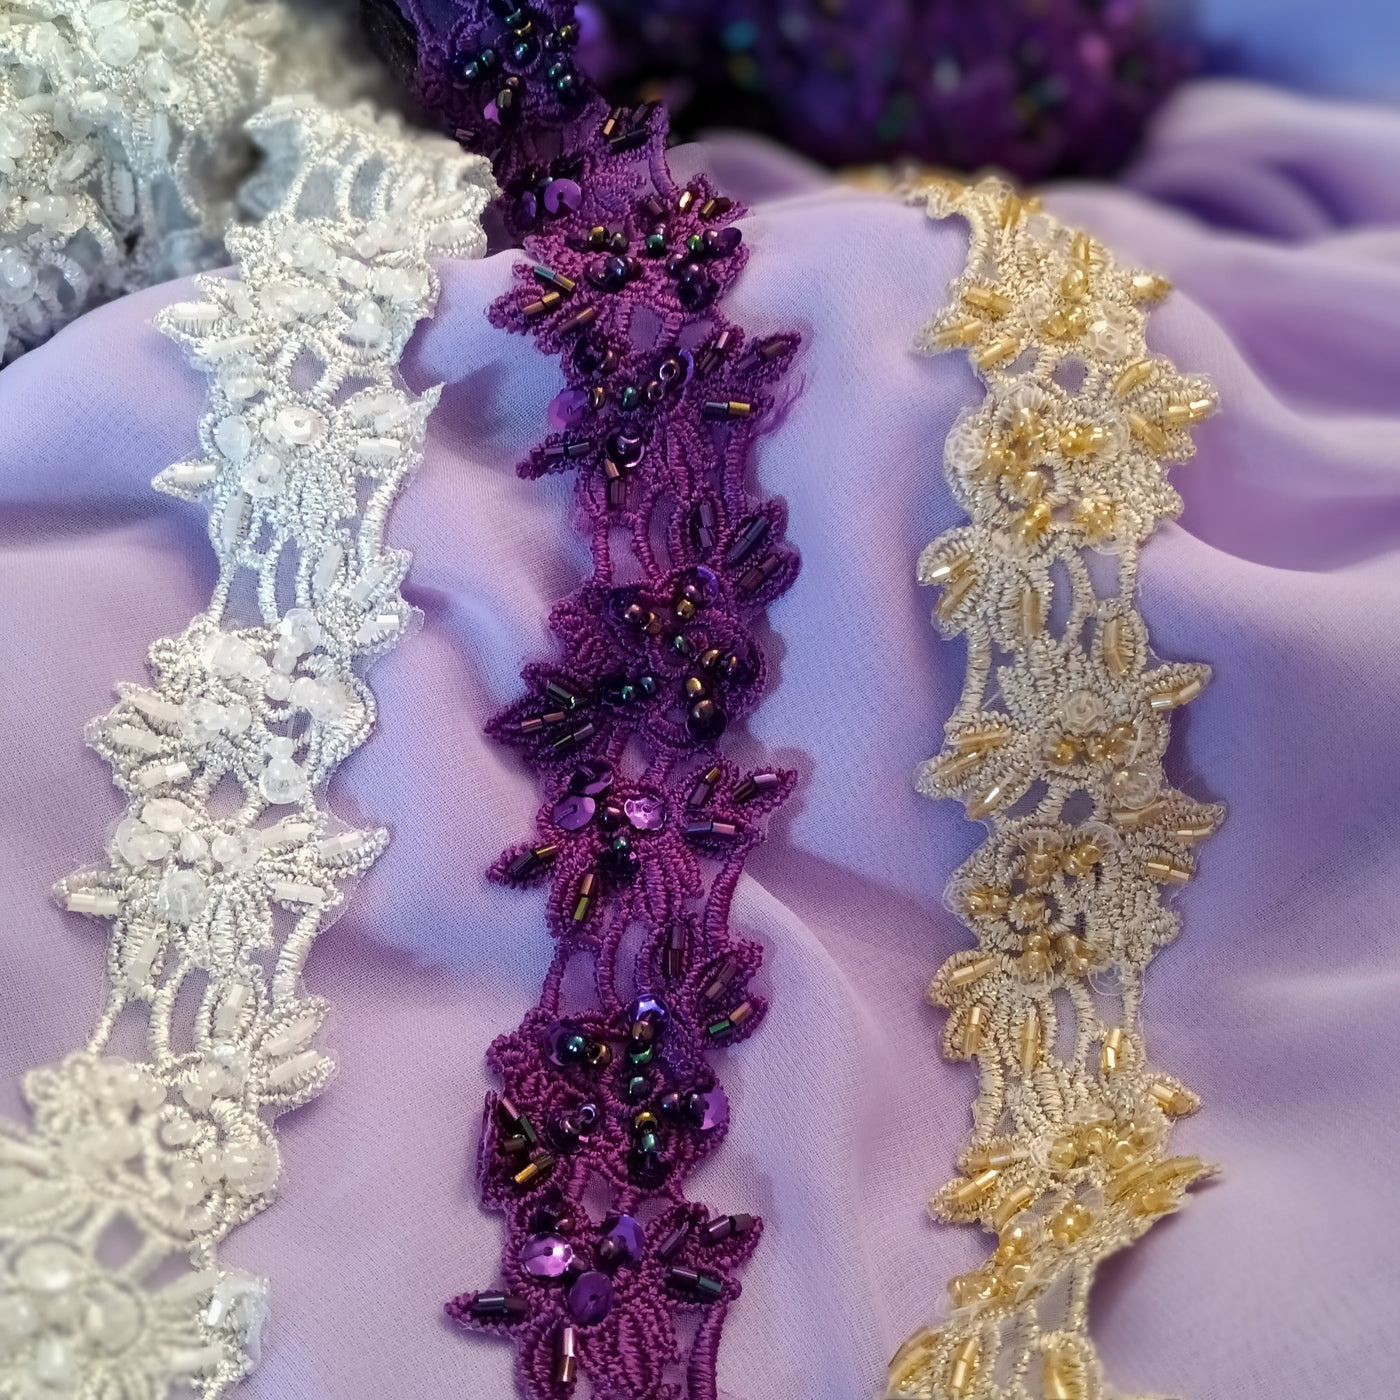 Embroidered Trimming with Heavy Beading on 100% Polyester Organza. Lace Usa